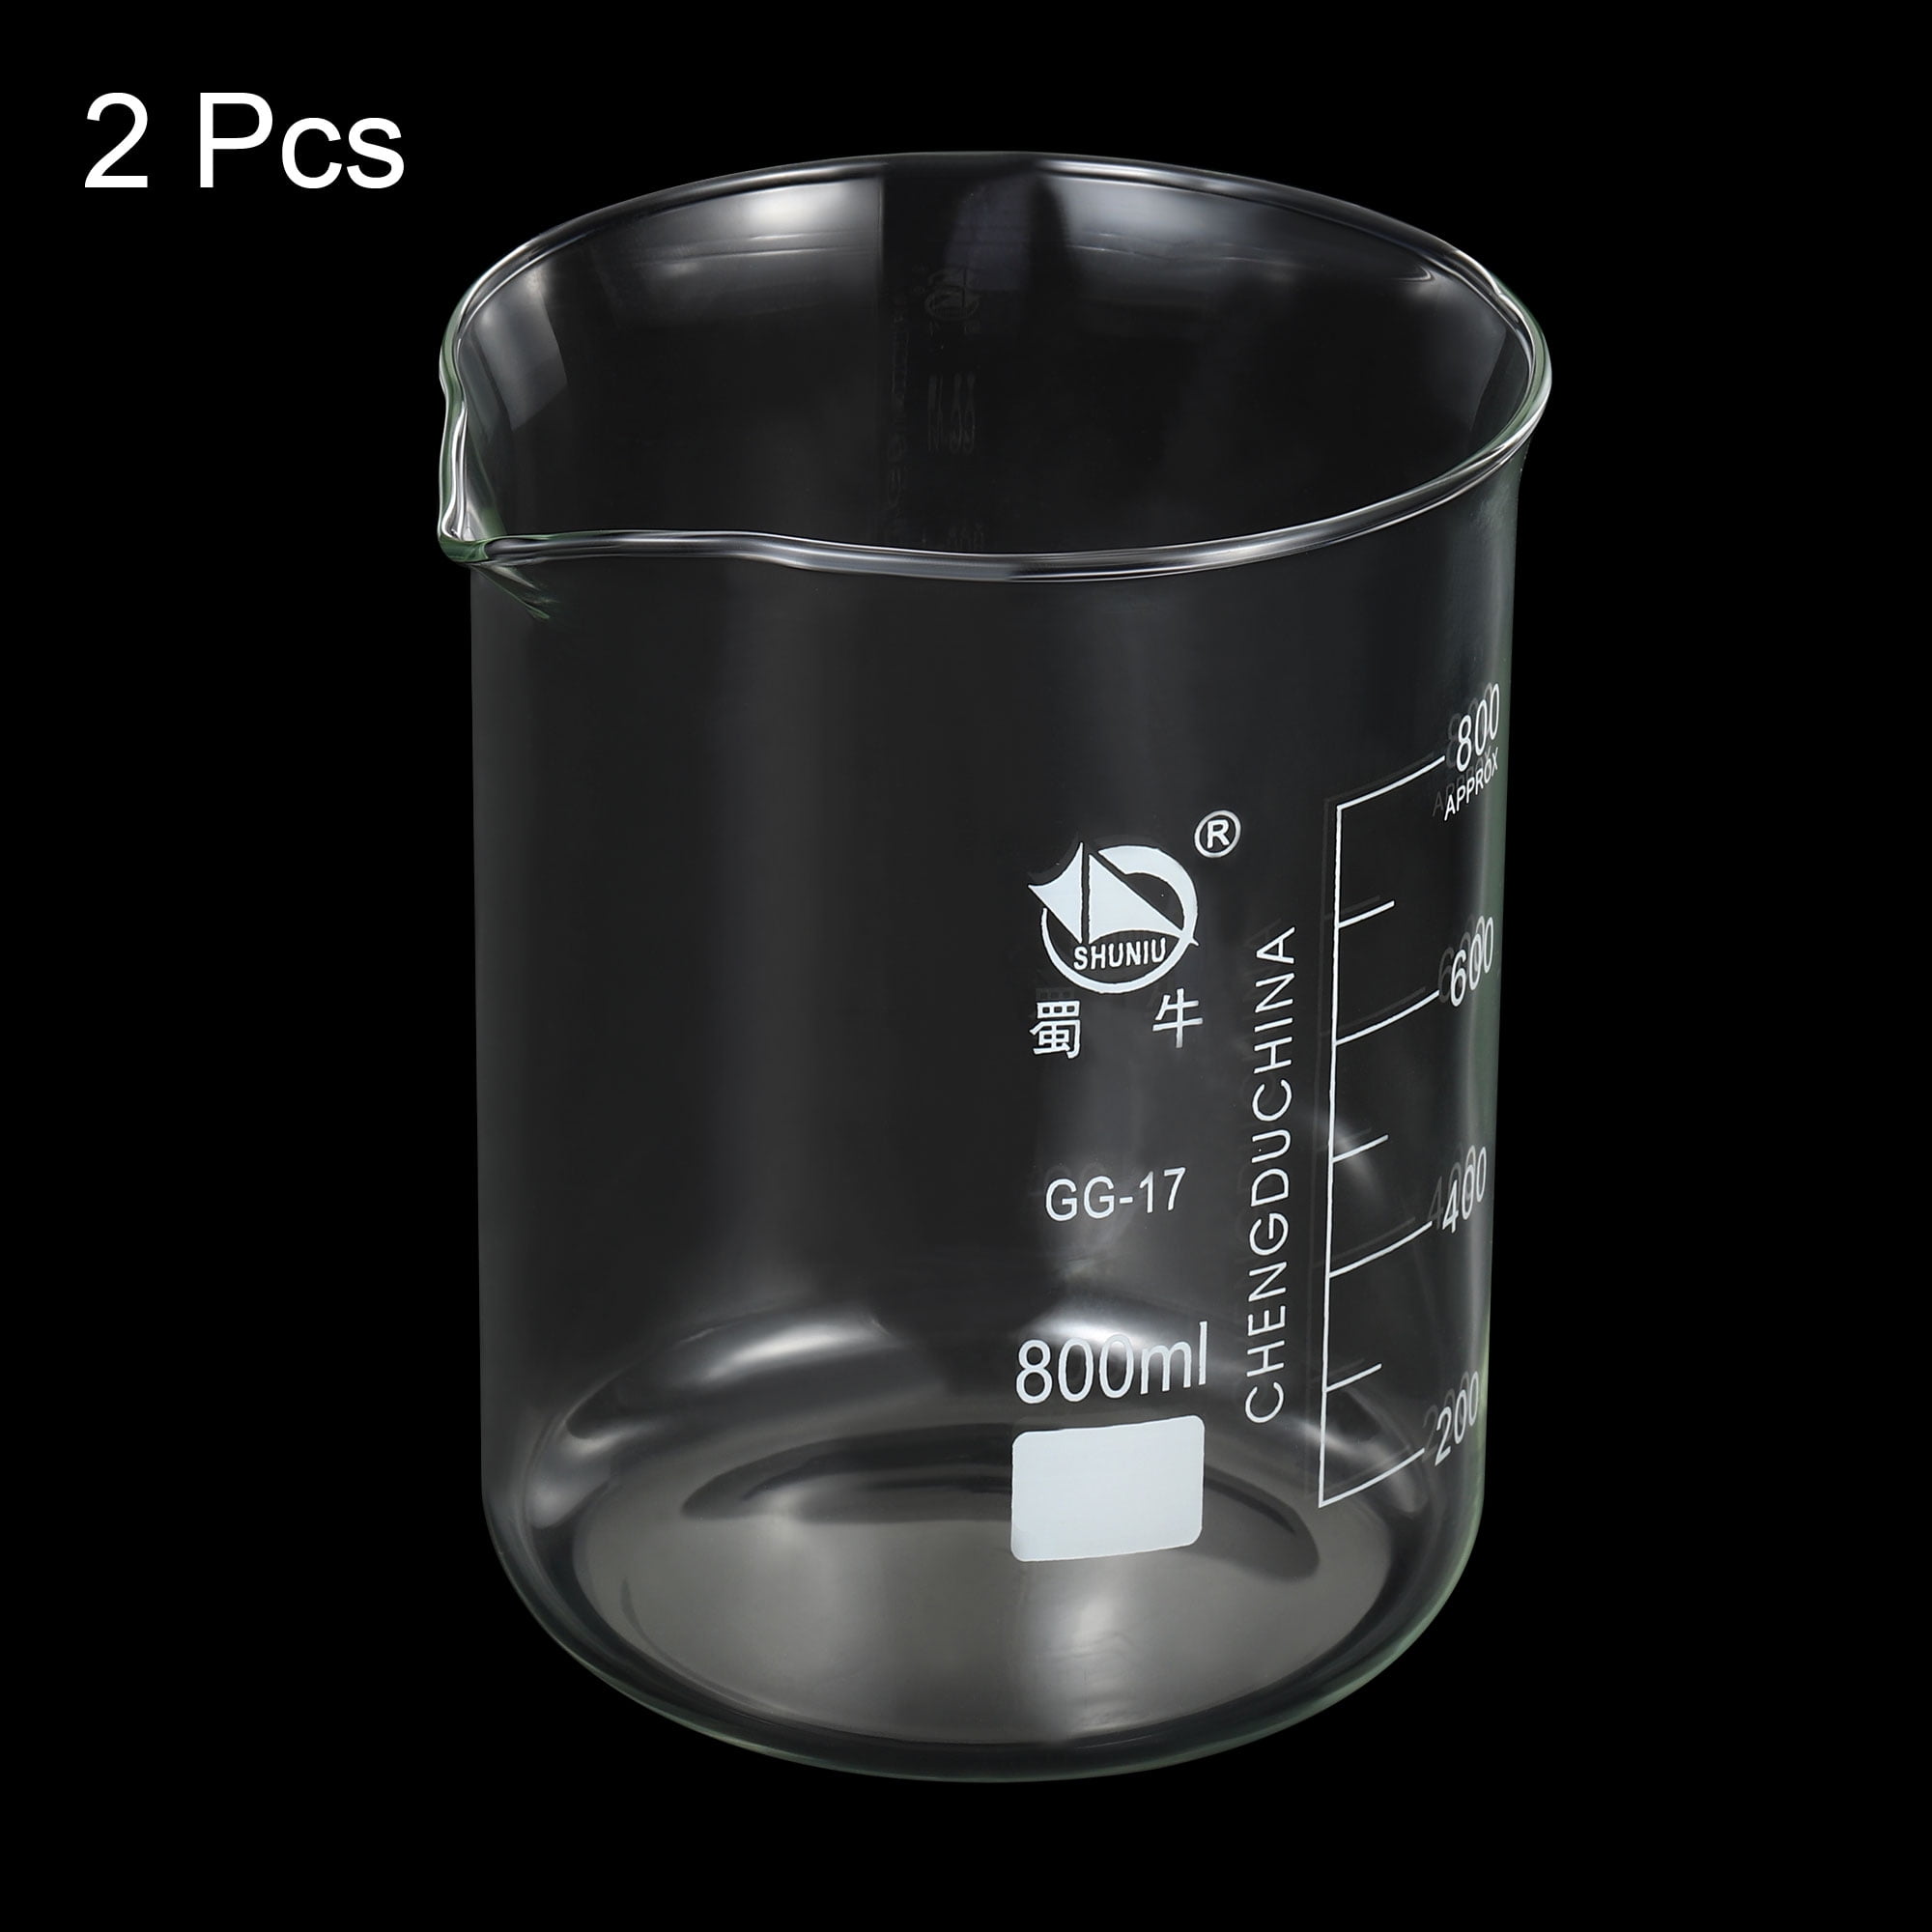 25ml 50ml Low Form Glass Beaker with Brush, 3.3 Glass Graduated Measuring  Cups - Transparent - Yahoo Shopping